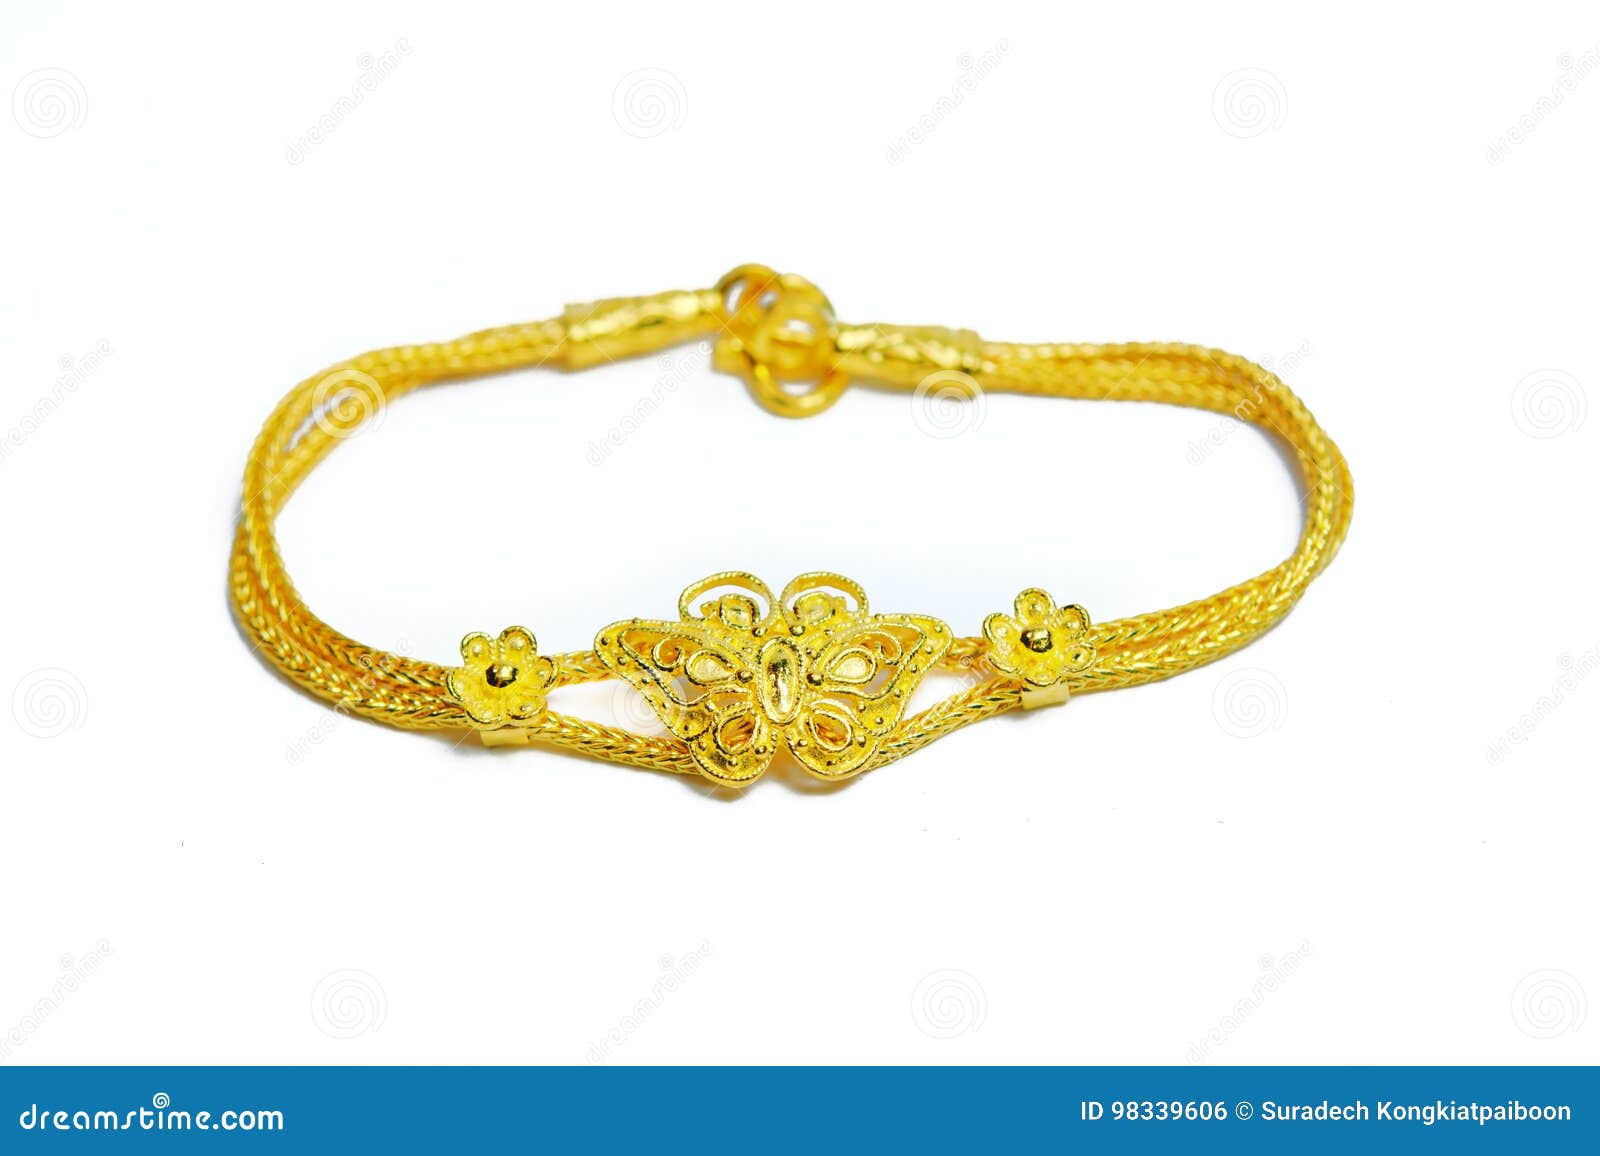 Gold Bracelet Designs For Women With Price